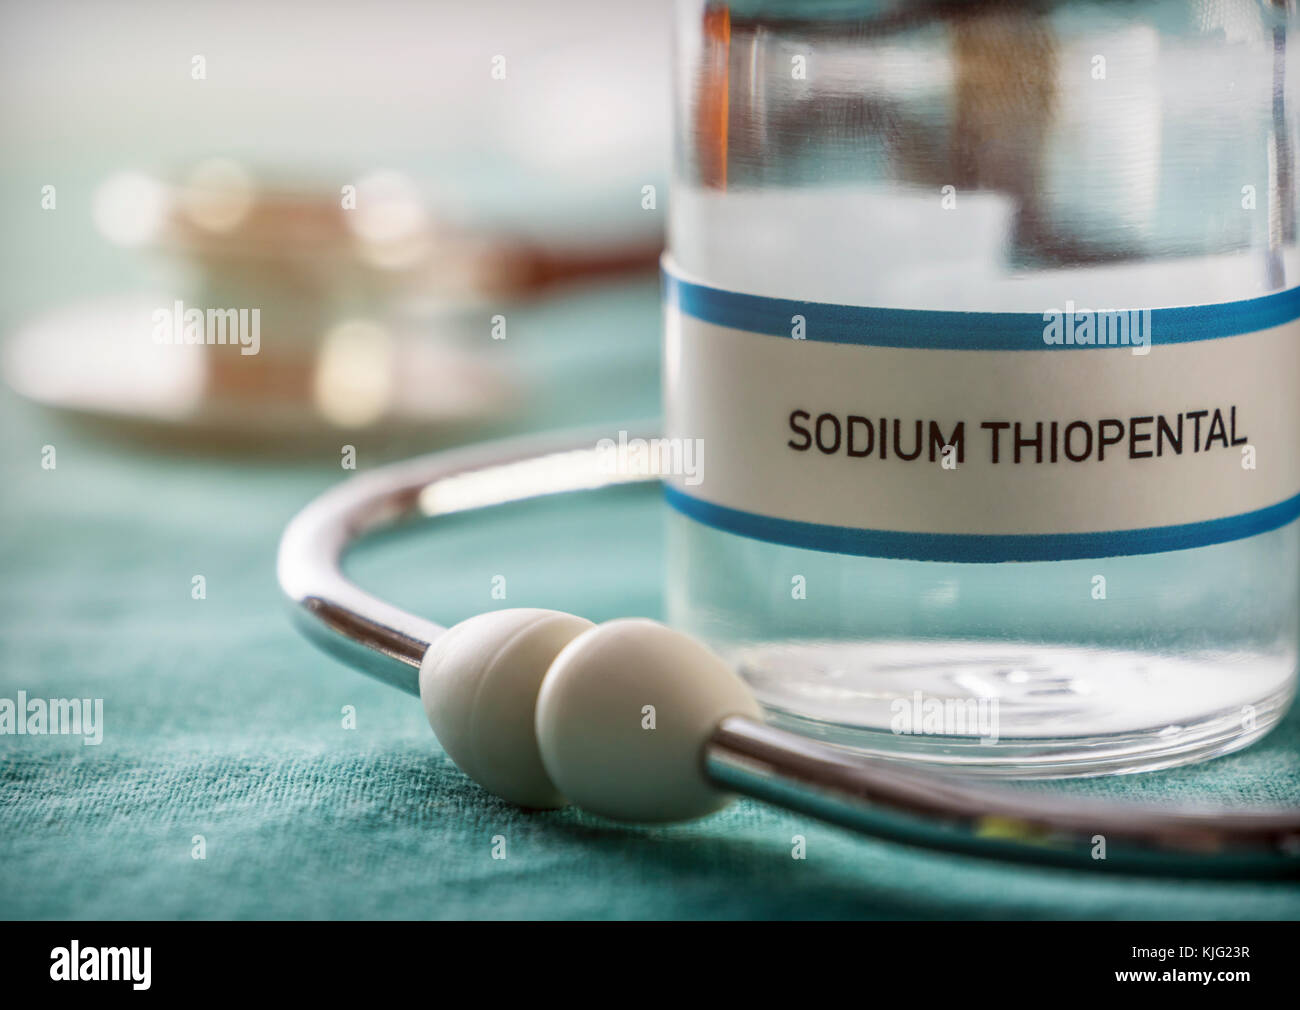 Vial With Sodium Thiopental Used For Euthanasia And Lethal Inyecion In A Hospita Stock Photo